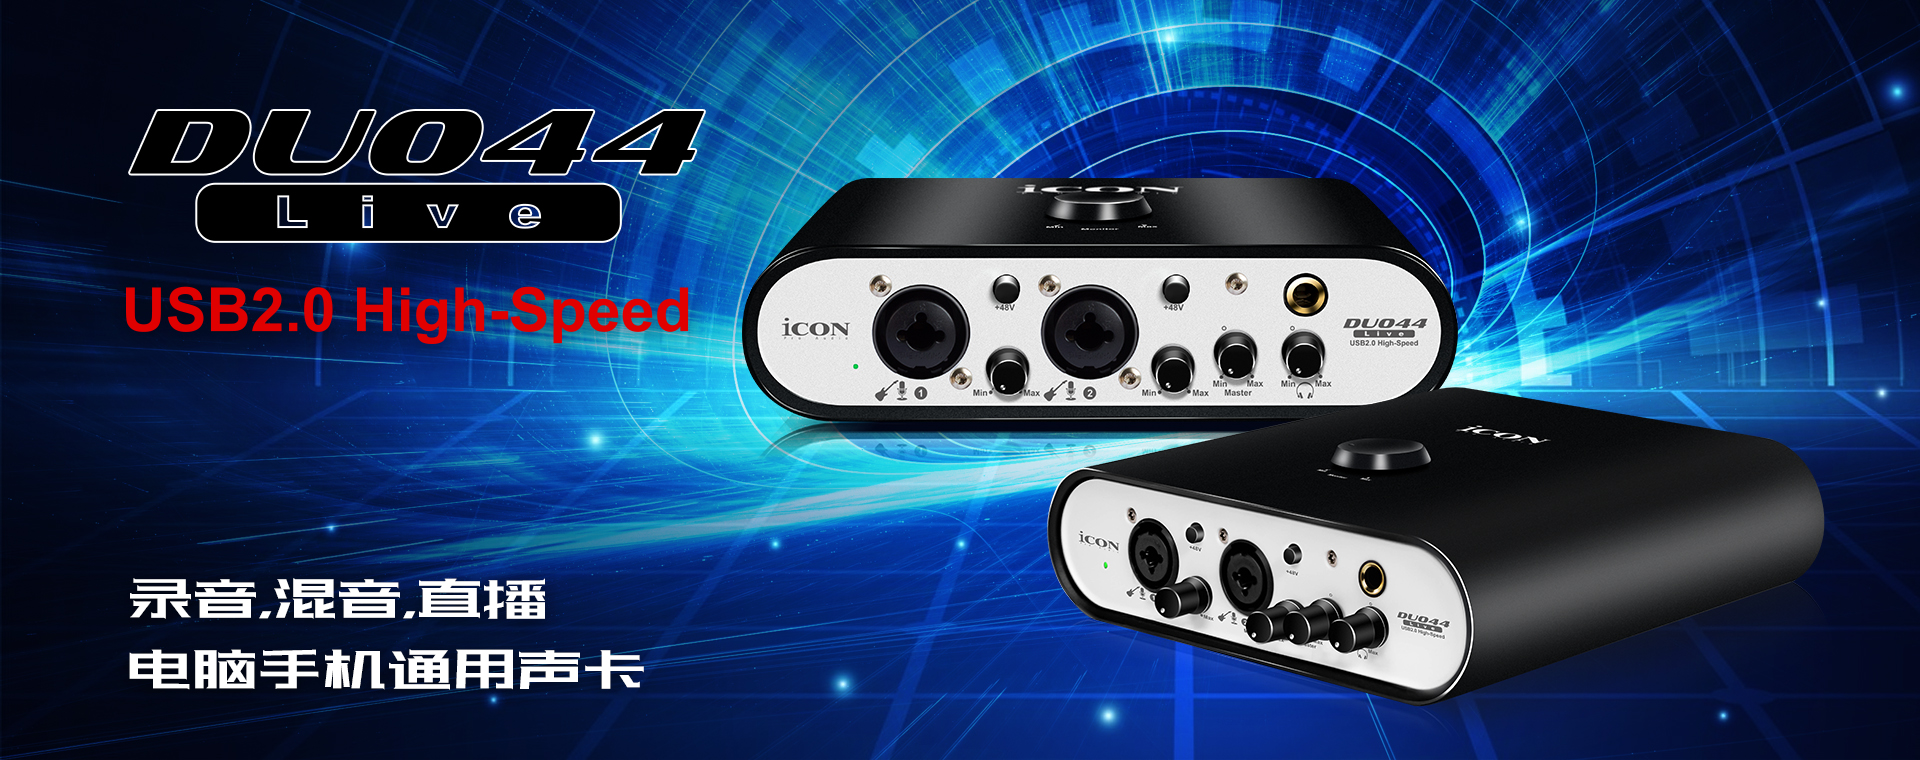 Duo Series Audio Interfaces: Duo 22 Live and Duo 44 Live for recording, mixing, and streaming